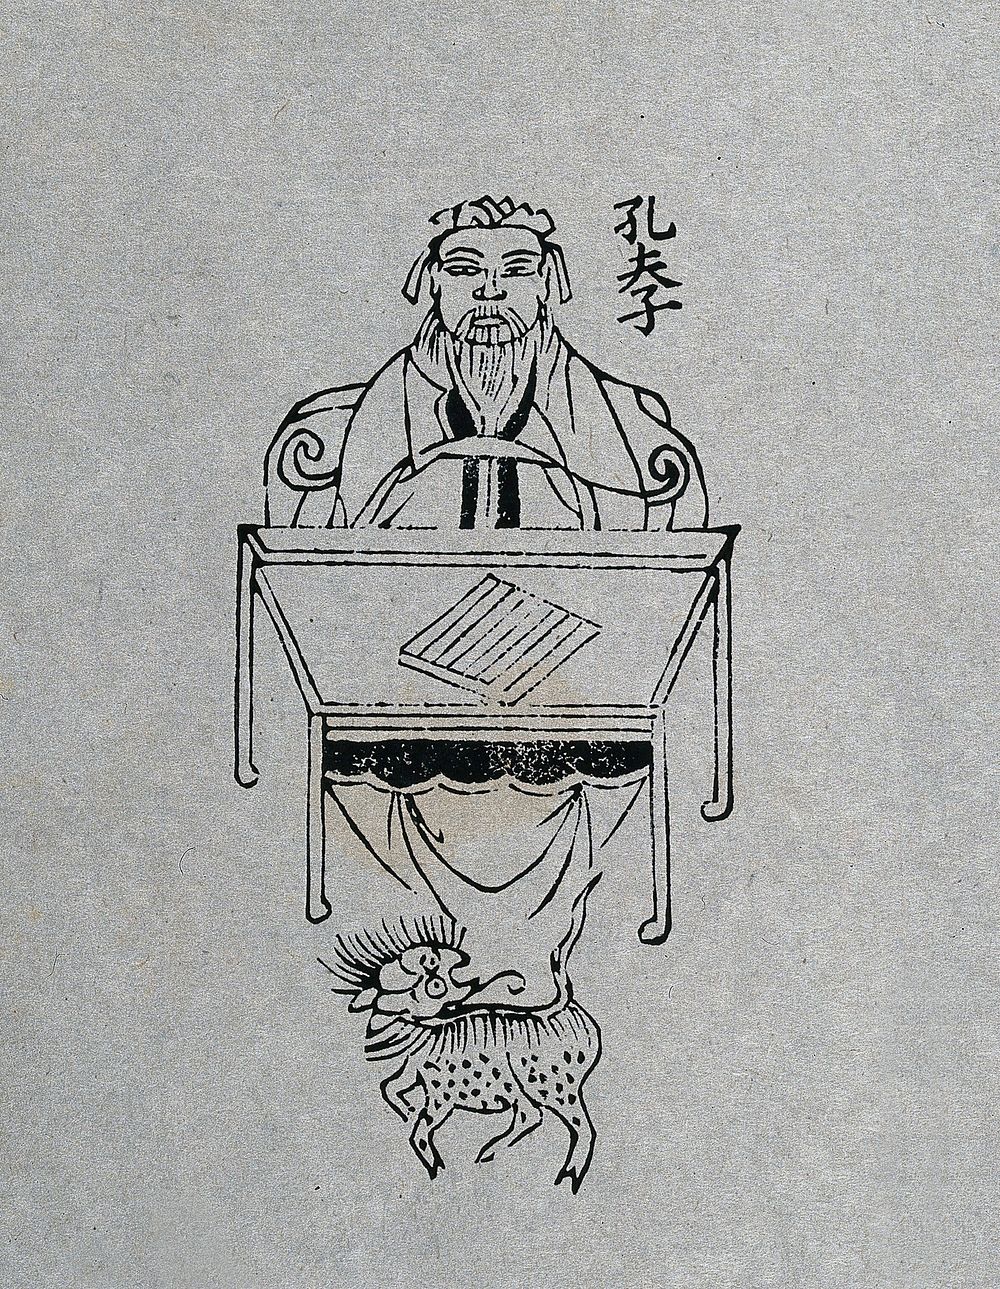 Confucius: a musical instrument  is lying on a small table in front of him; a small dog in foreground. Woodcut, 1850/1900 .